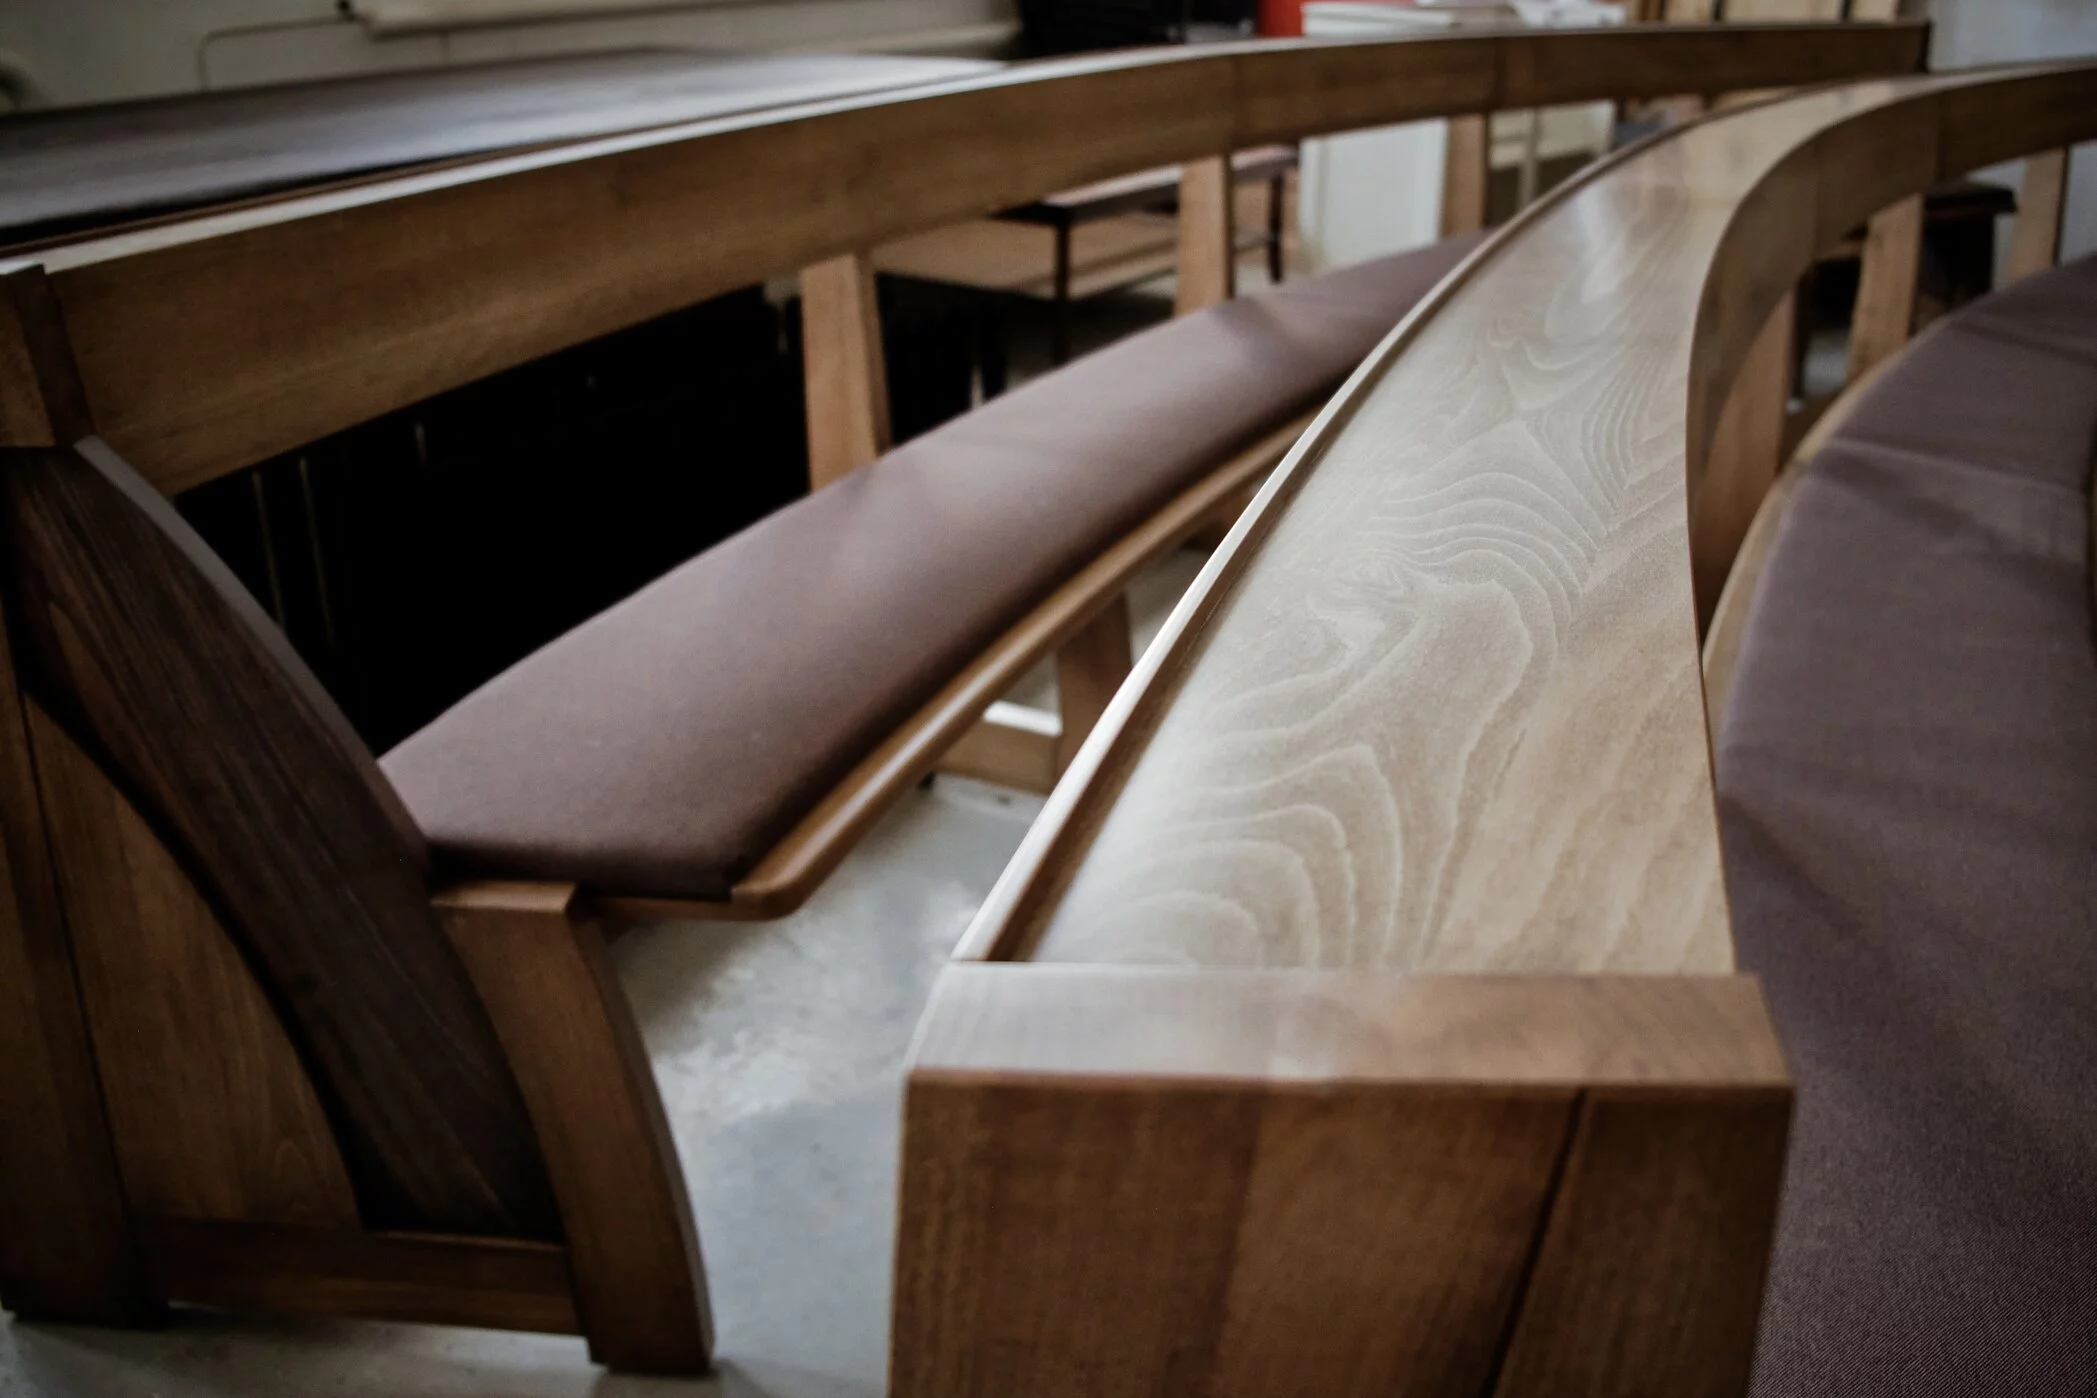 Zoe's minimalist church pew design combines functionality and quality. View of the finished bench with a seat cushion